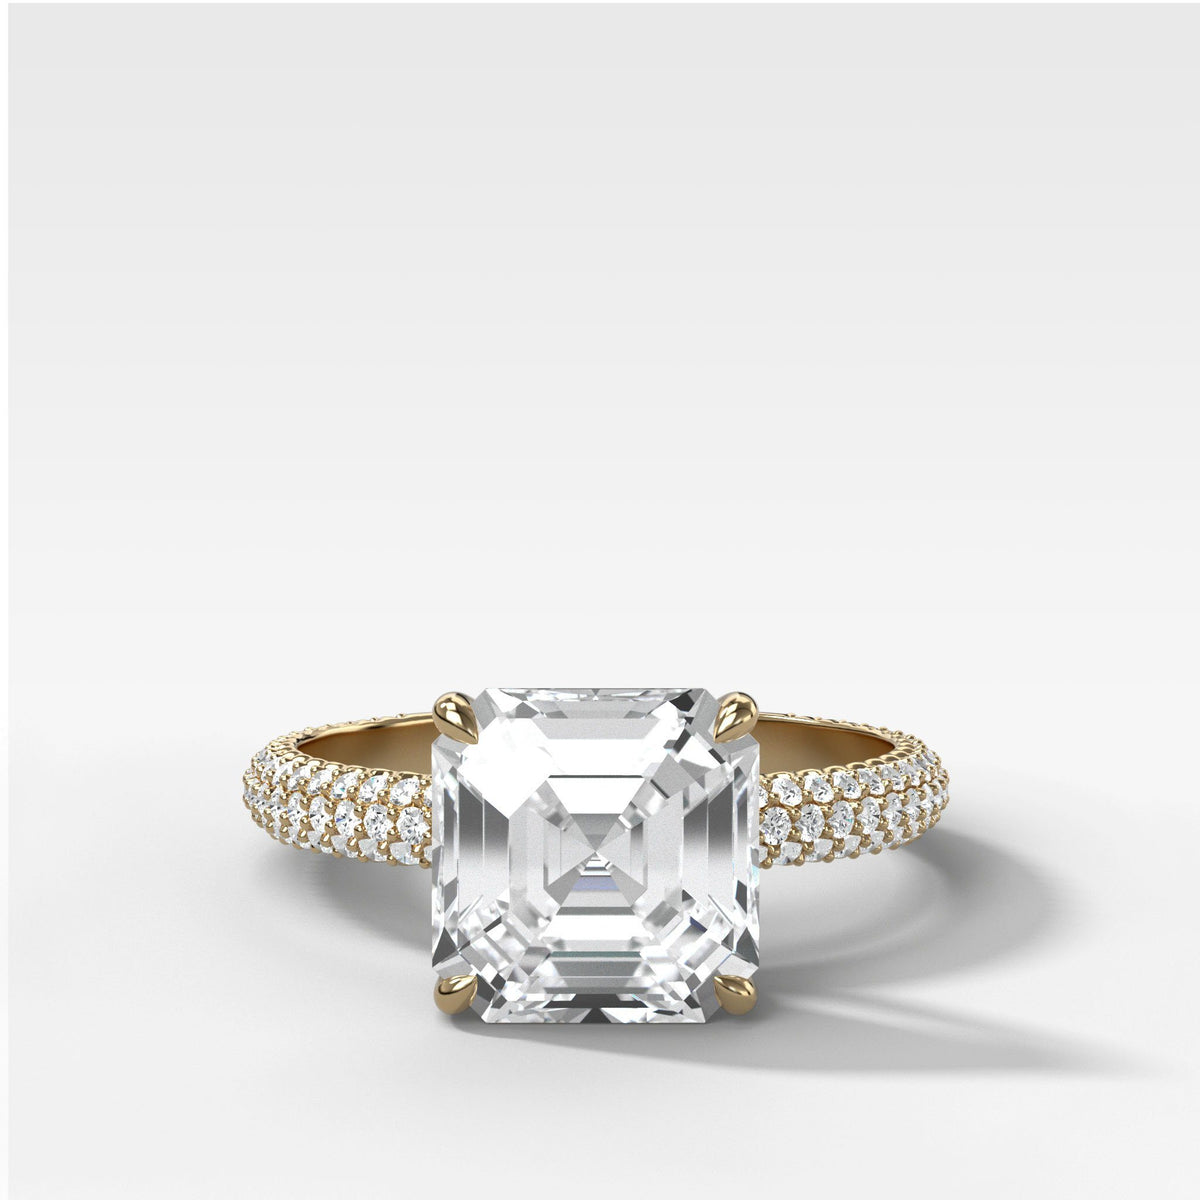 Triple Row Pav≈Ω Engagement Ring With Asscher Cut by Good Stone in Yellow Gold